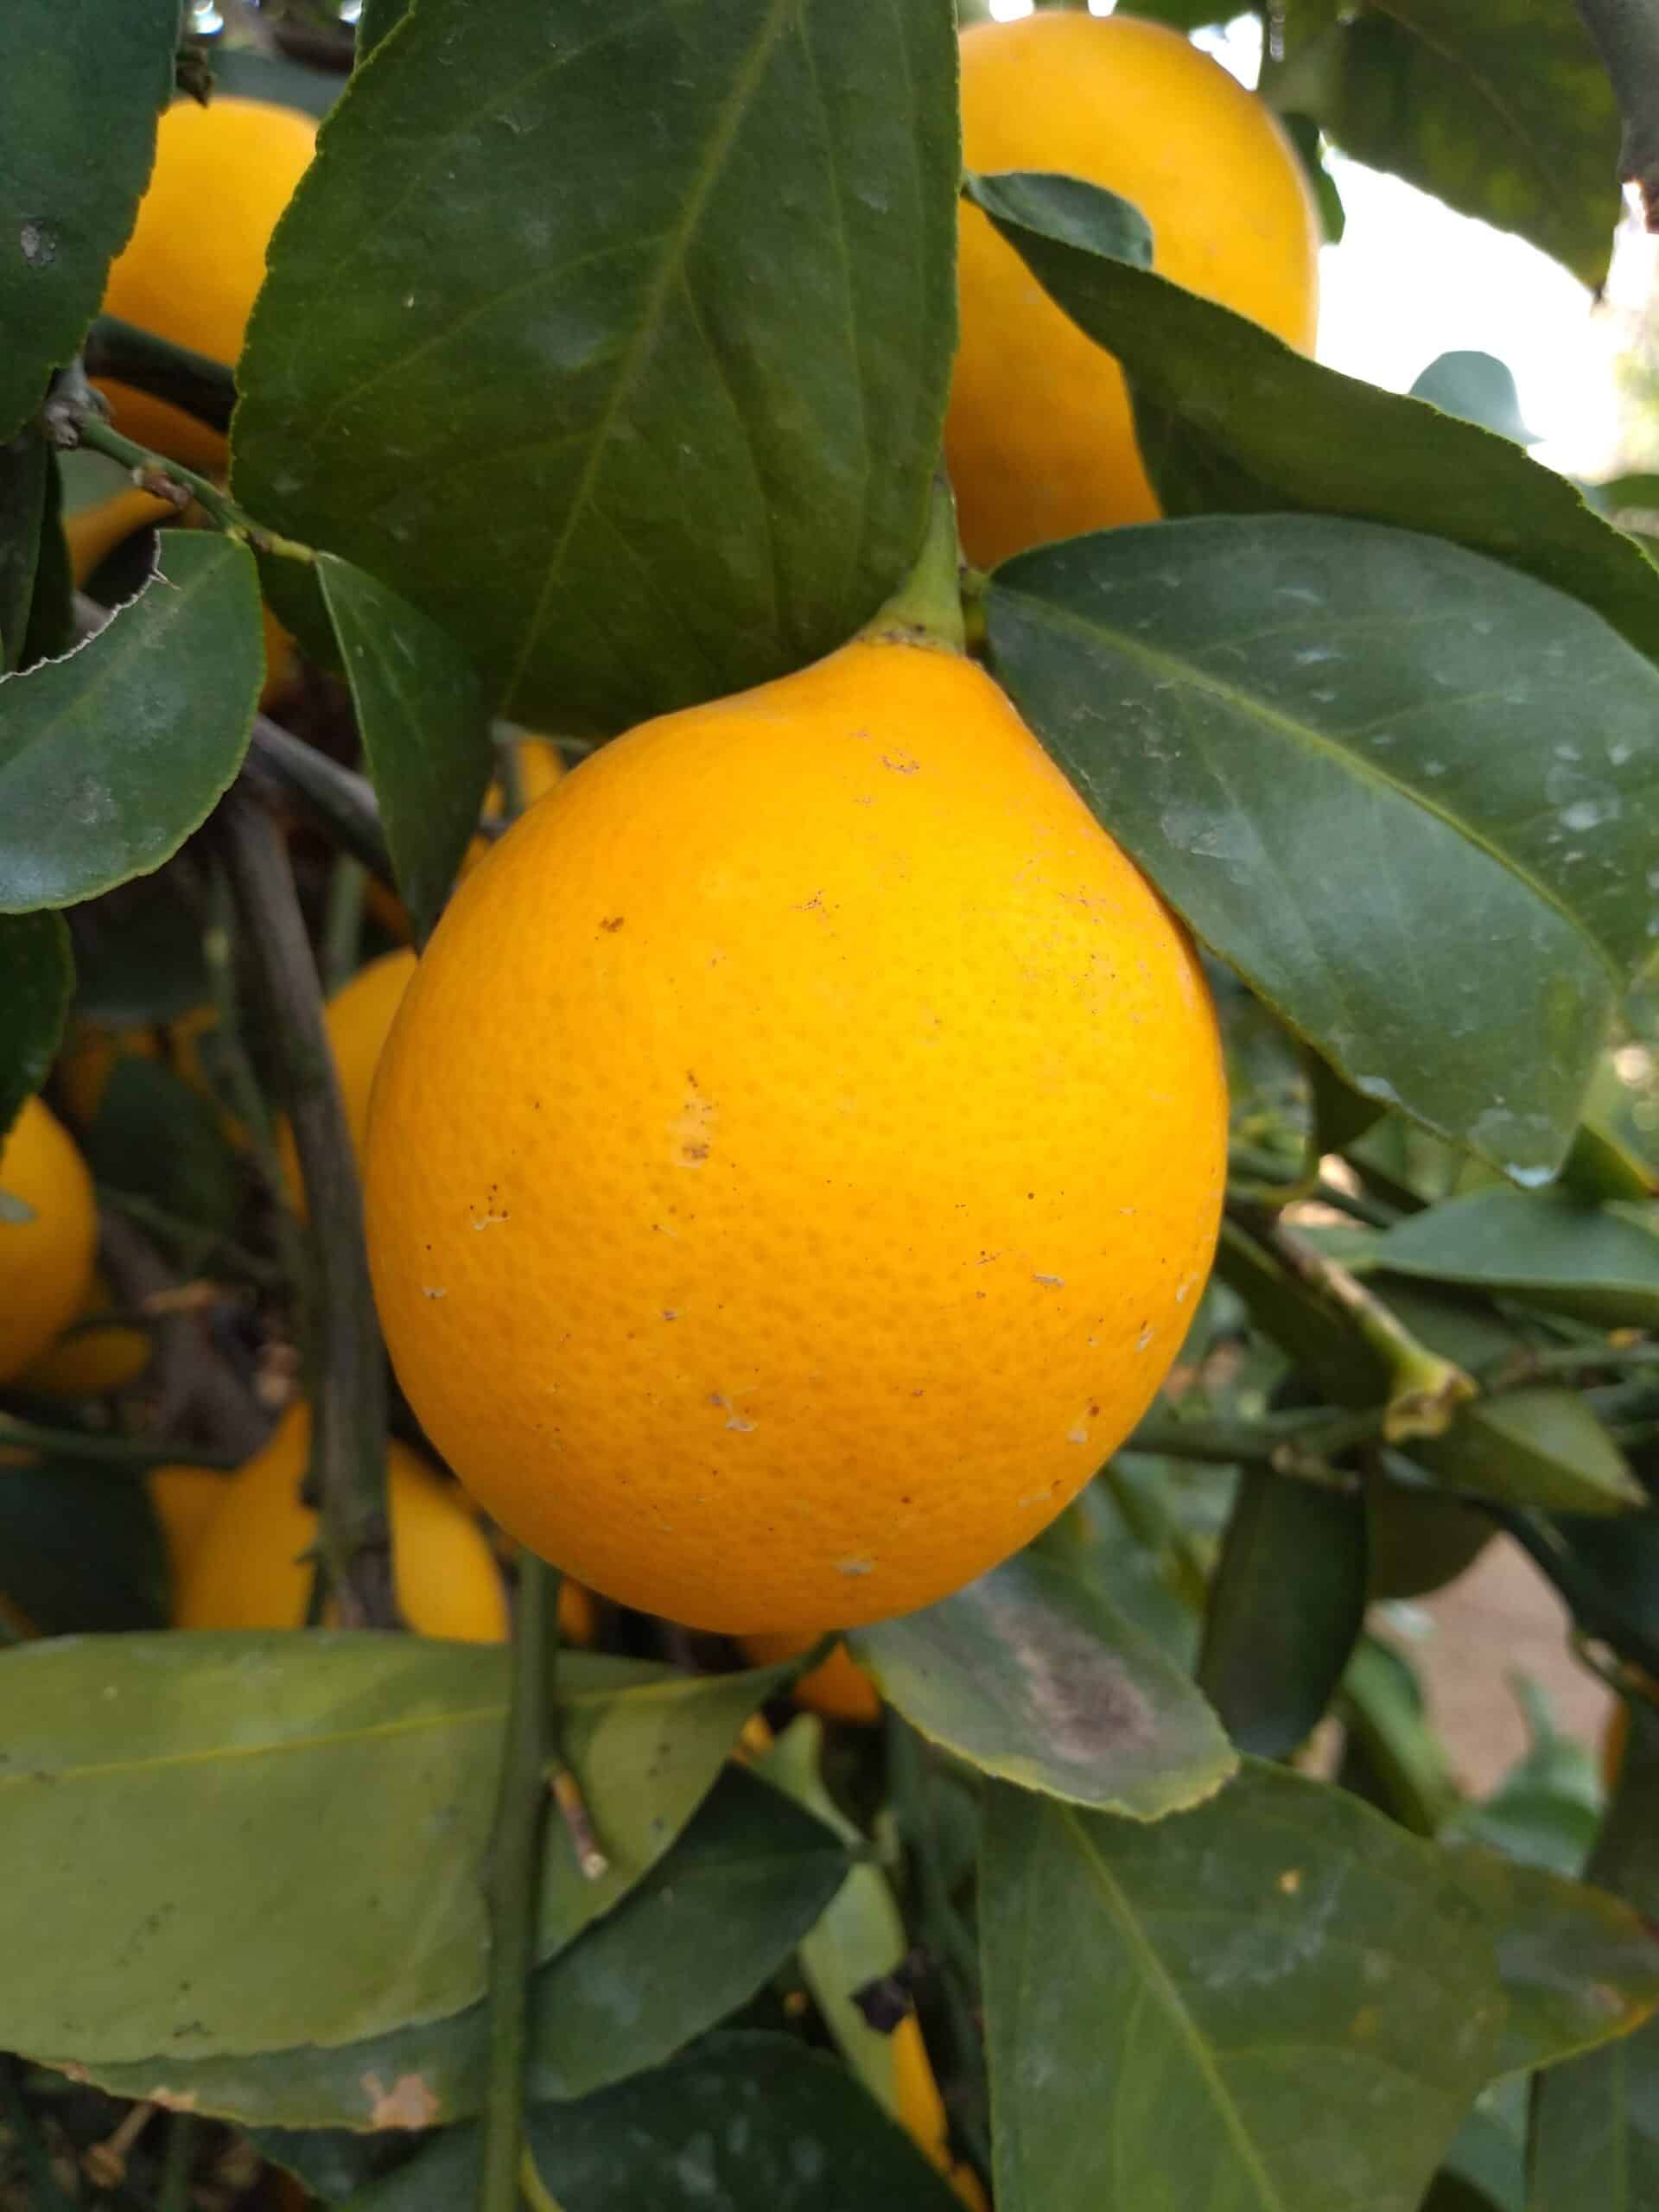 Meyer lemons pictured growing in a tree.